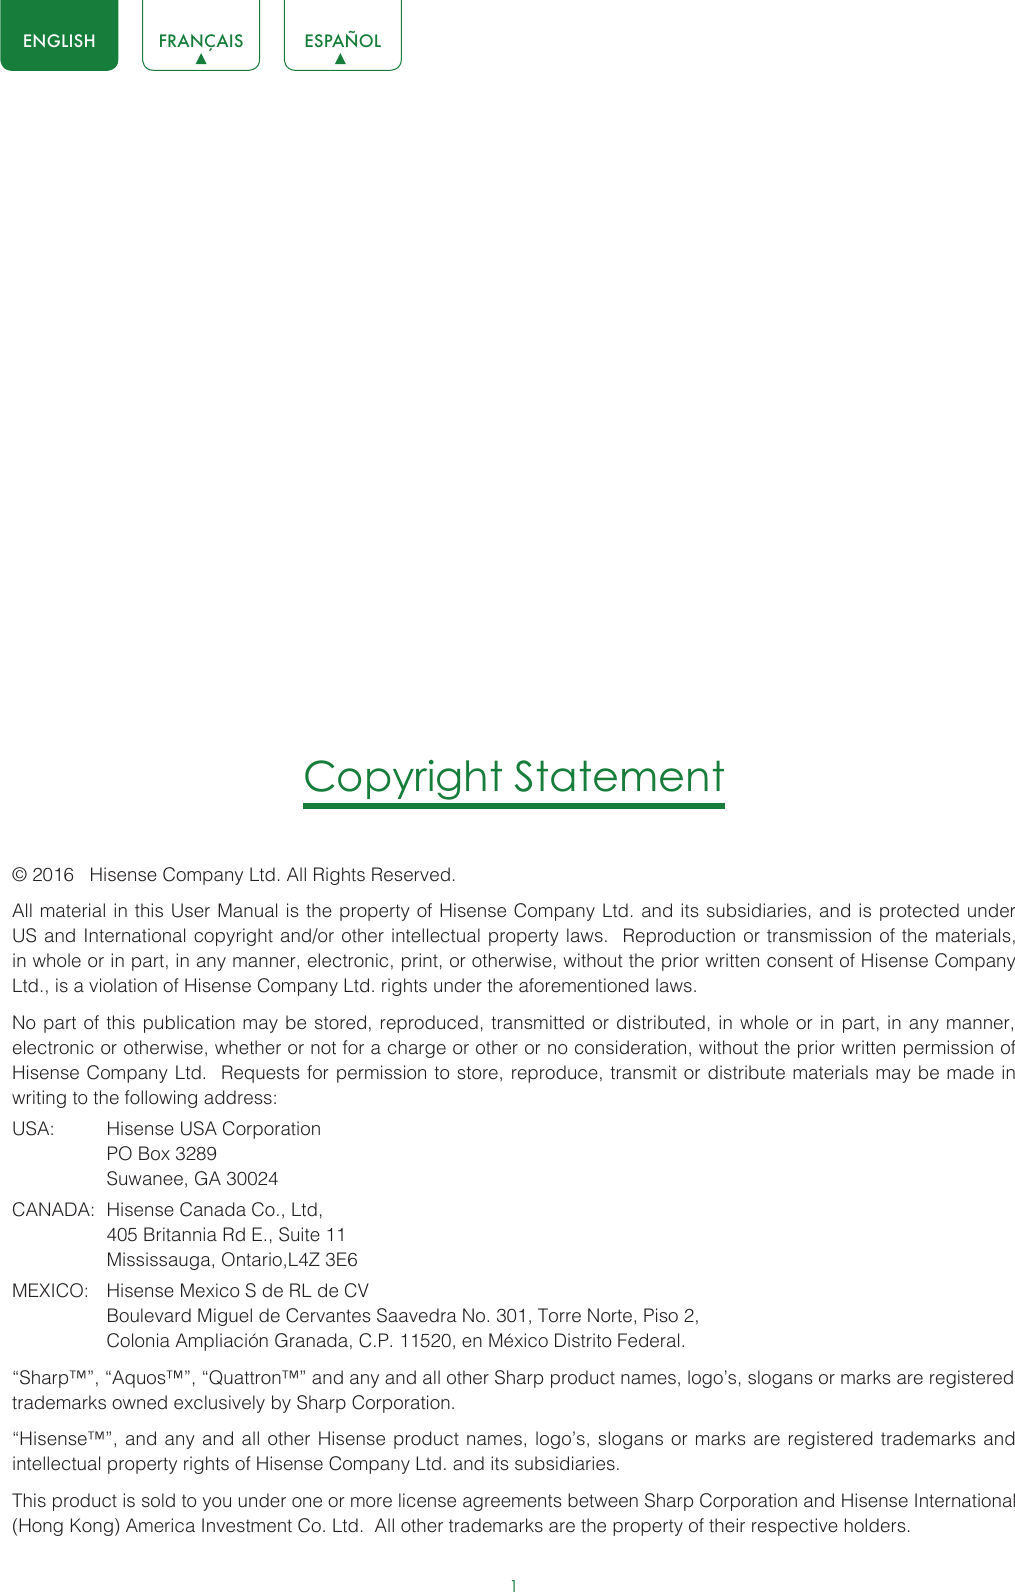 1ENGLISH FRANÇAIS ESPAÑOLCopyright Statement© 2016   Hisense Company Ltd. All Rights Reserved.All material in this User Manual is the property of Hisense Company Ltd. and its subsidiaries, and is protected under US and International copyright and/or other intellectual property laws.  Reproduction or transmission of the materials, in whole or in part, in any manner, electronic, print, or otherwise, without the prior written consent of Hisense Company Ltd., is a violation of Hisense Company Ltd. rights under the aforementioned laws. No part of this publication may be stored, reproduced, transmitted or distributed, in whole or in part, in any manner, electronic or otherwise, whether or not for a charge or other or no consideration, without the prior written permission of Hisense Company Ltd.  Requests for permission to store, reproduce, transmit or distribute materials may be made in writing to the following address:USA:  Hisense USA Corporation  PO Box 3289  Suwanee, GA 30024CANADA:  Hisense Canada Co., Ltd,  405 Britannia Rd E., Suite 11  Mississauga, Ontario,L4Z 3E6MEXICO:  Hisense Mexico S de RL de CV  Boulevard Miguel de Cervantes Saavedra No. 301, Torre Norte, Piso 2,  Colonia Ampliación Granada, C.P. 11520, en México Distrito Federal.“Sharp™”, “Aquos™”, “Quattron™” and any and all other Sharp product names, logo’s, slogans or marks are registered trademarks owned exclusively by Sharp Corporation.“Hisense™”, and any and all other Hisense product names, logo’s, slogans or marks are registered trademarks and intellectual property rights of Hisense Company Ltd. and its subsidiaries. This product is sold to you under one or more license agreements between Sharp Corporation and Hisense International (Hong Kong) America Investment Co. Ltd.  All other trademarks are the property of their respective holders.